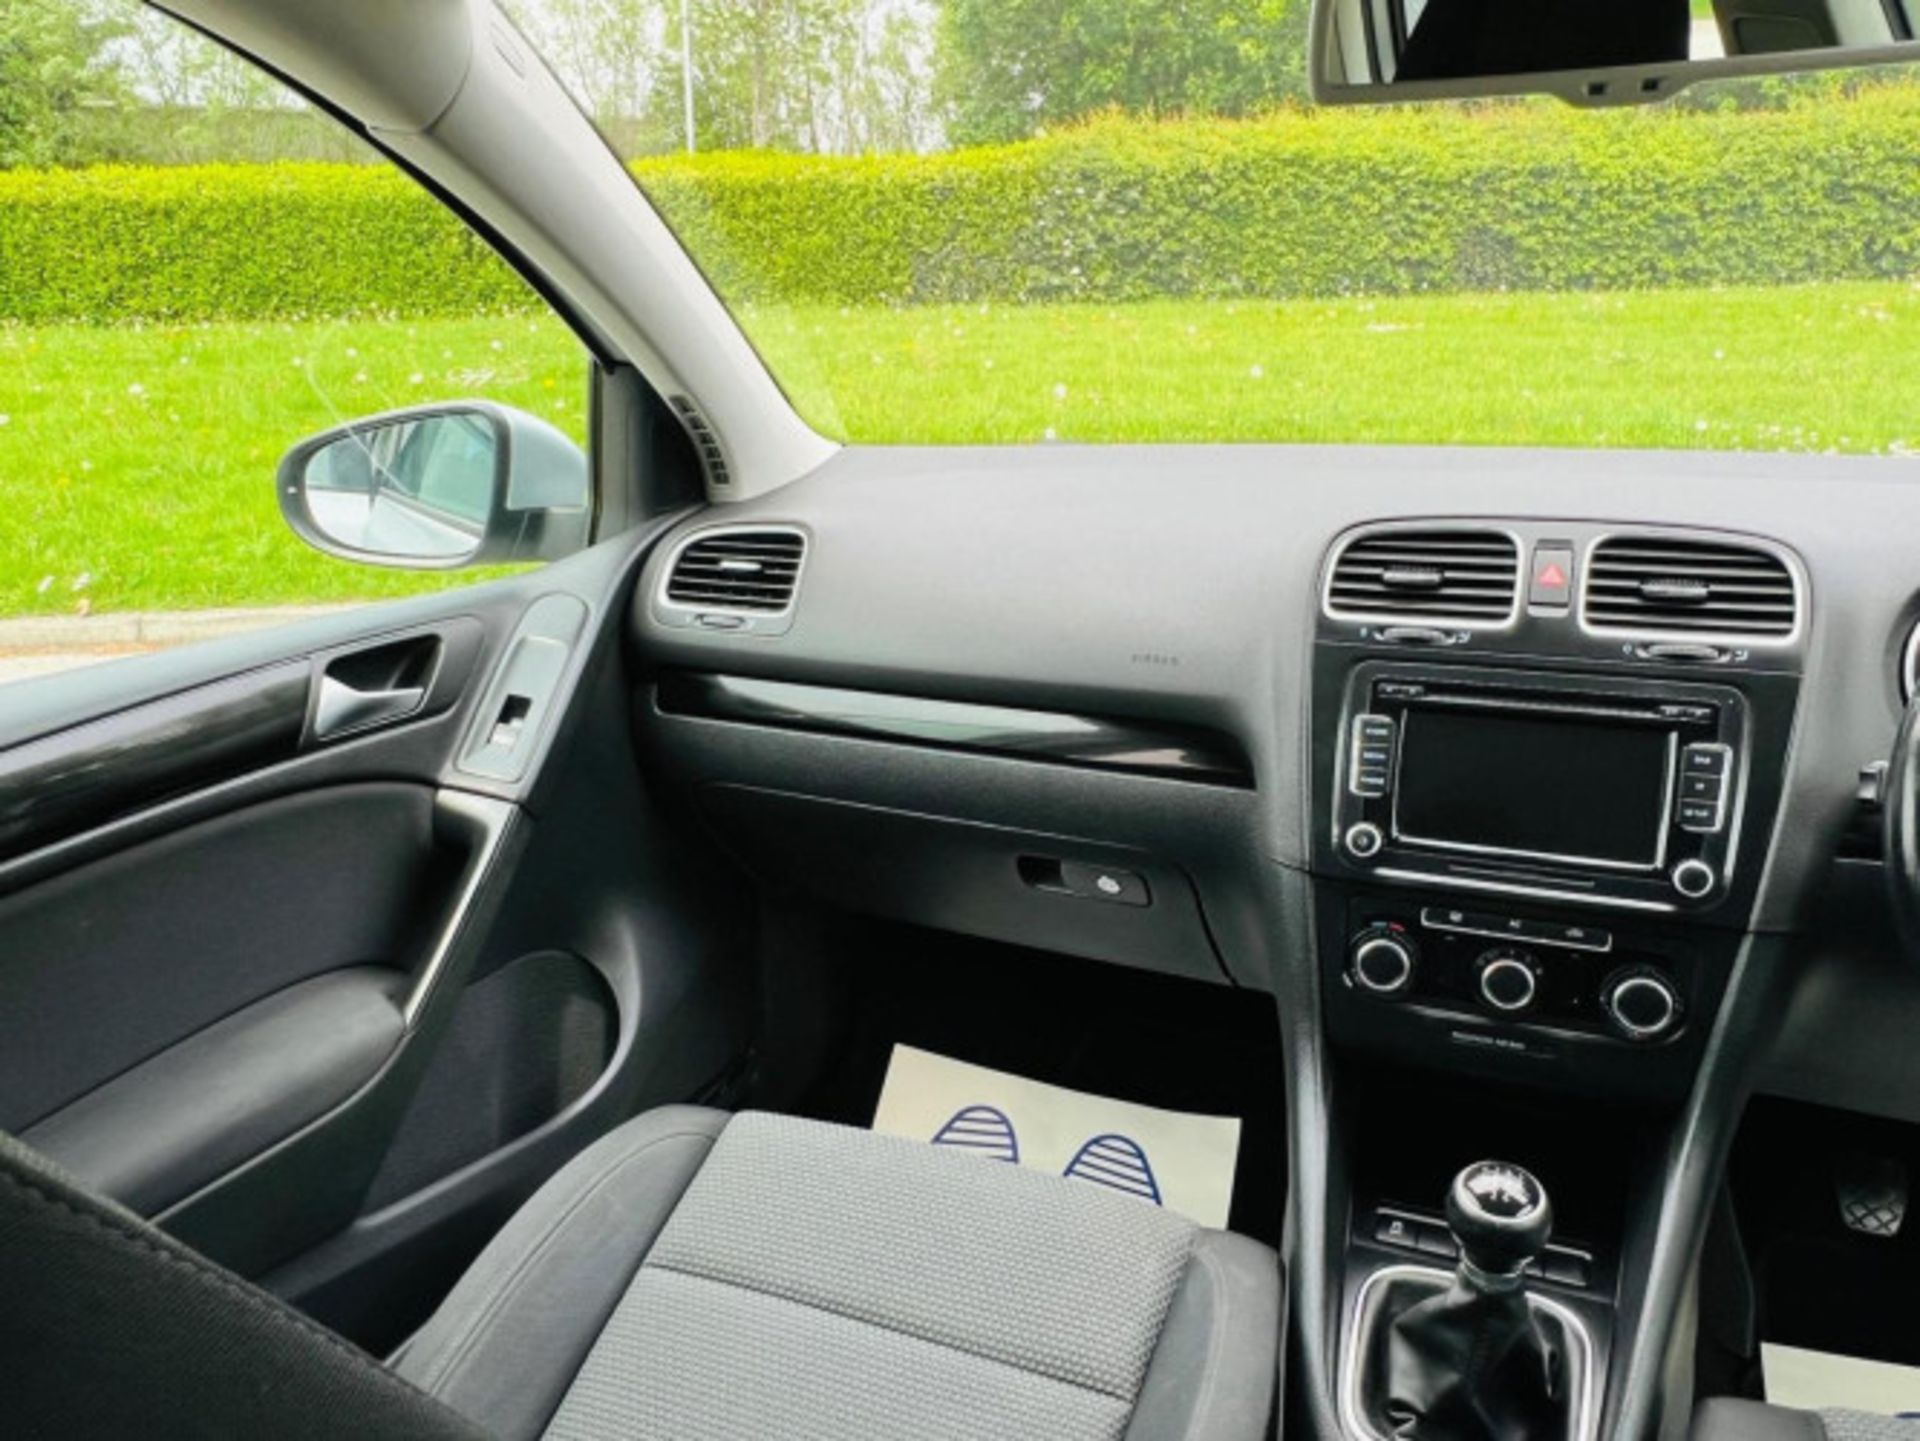 IMPECCABLE 2012 VOLKSWAGEN GOLF 1.6 TDI MATCH >>--NO VAT ON HAMMER--<< - Image 87 of 116